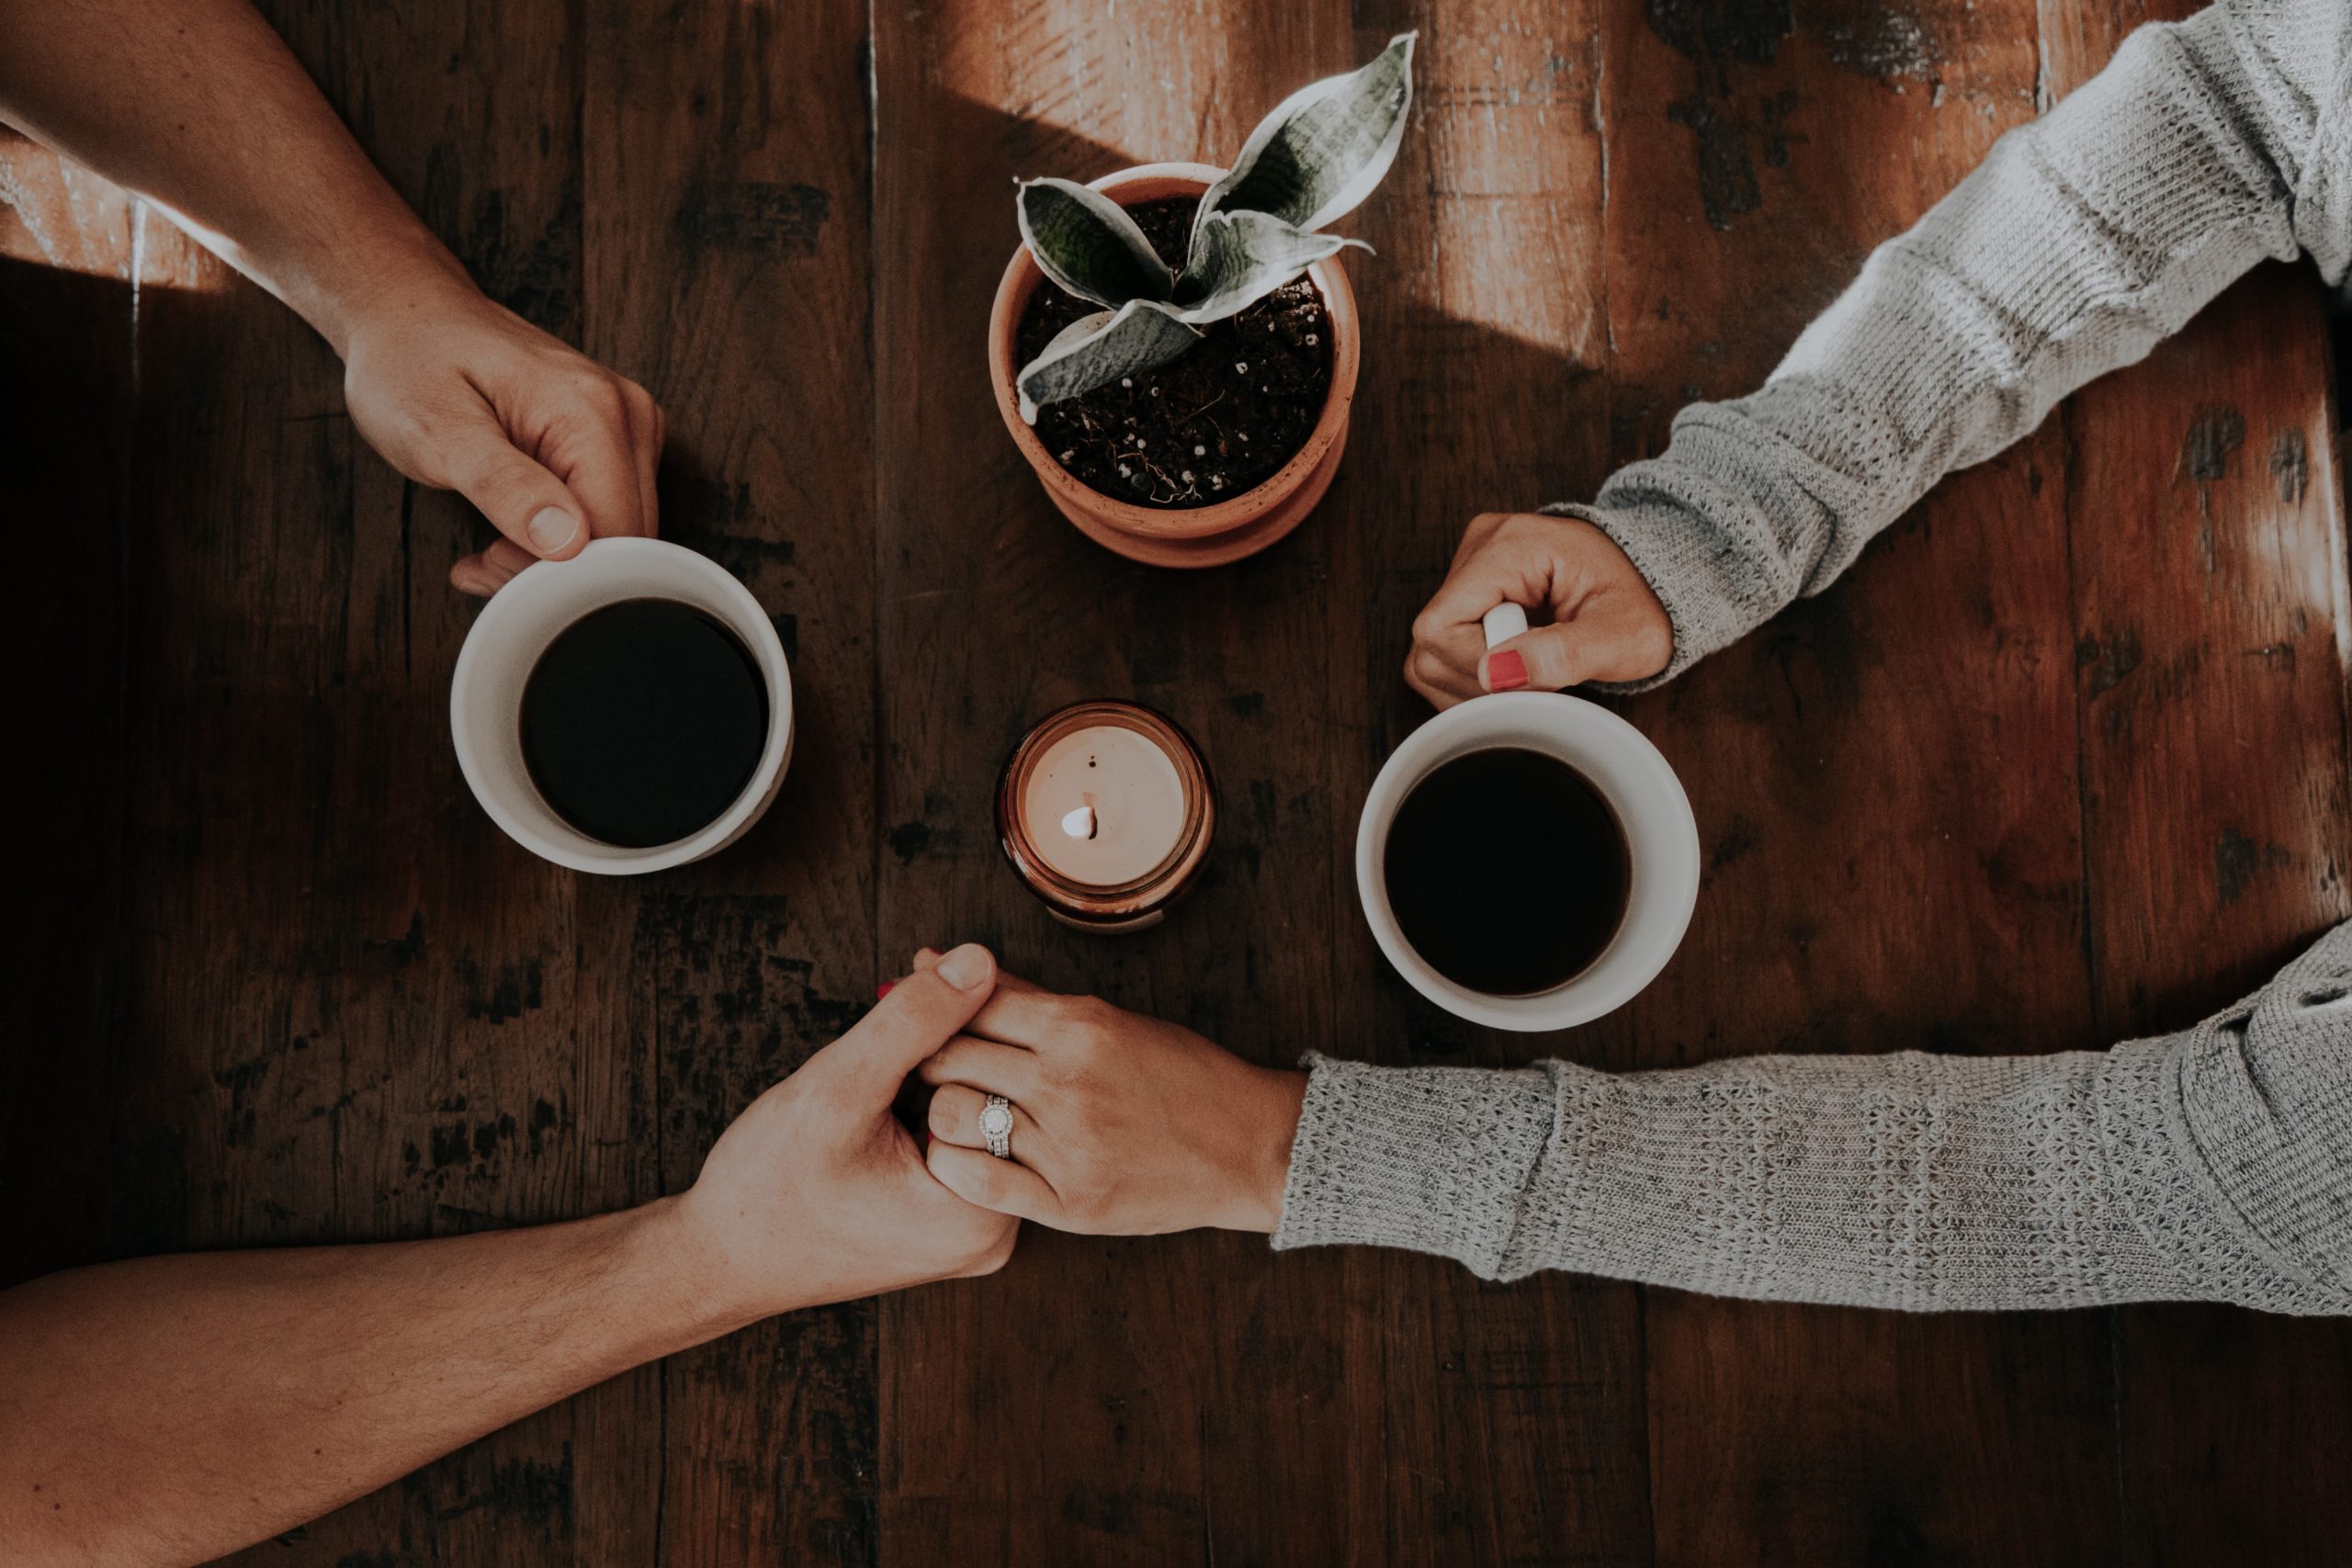 Two people holding hands over coffee